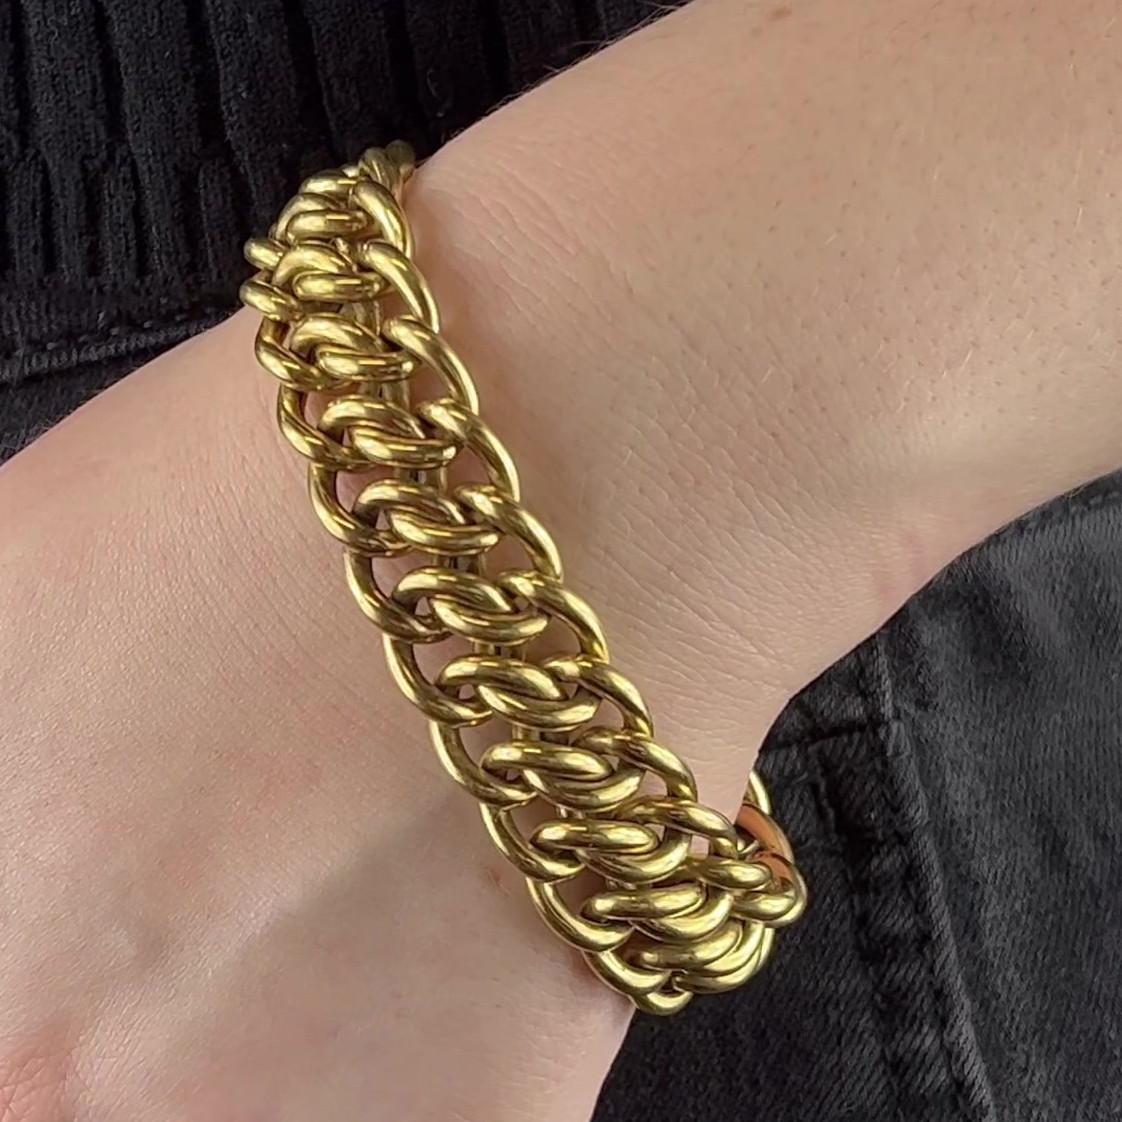 One Mid Century Cartier 18 Karat Gold Bracelet. Crafted in 18 karat yellow gold, signed Cartier Paris, with French hallmarks, serial #04295. Circa 1960s. The bracelet measures 7 3/4 inches in length. 

About this Item: Adorn your wrist in pure